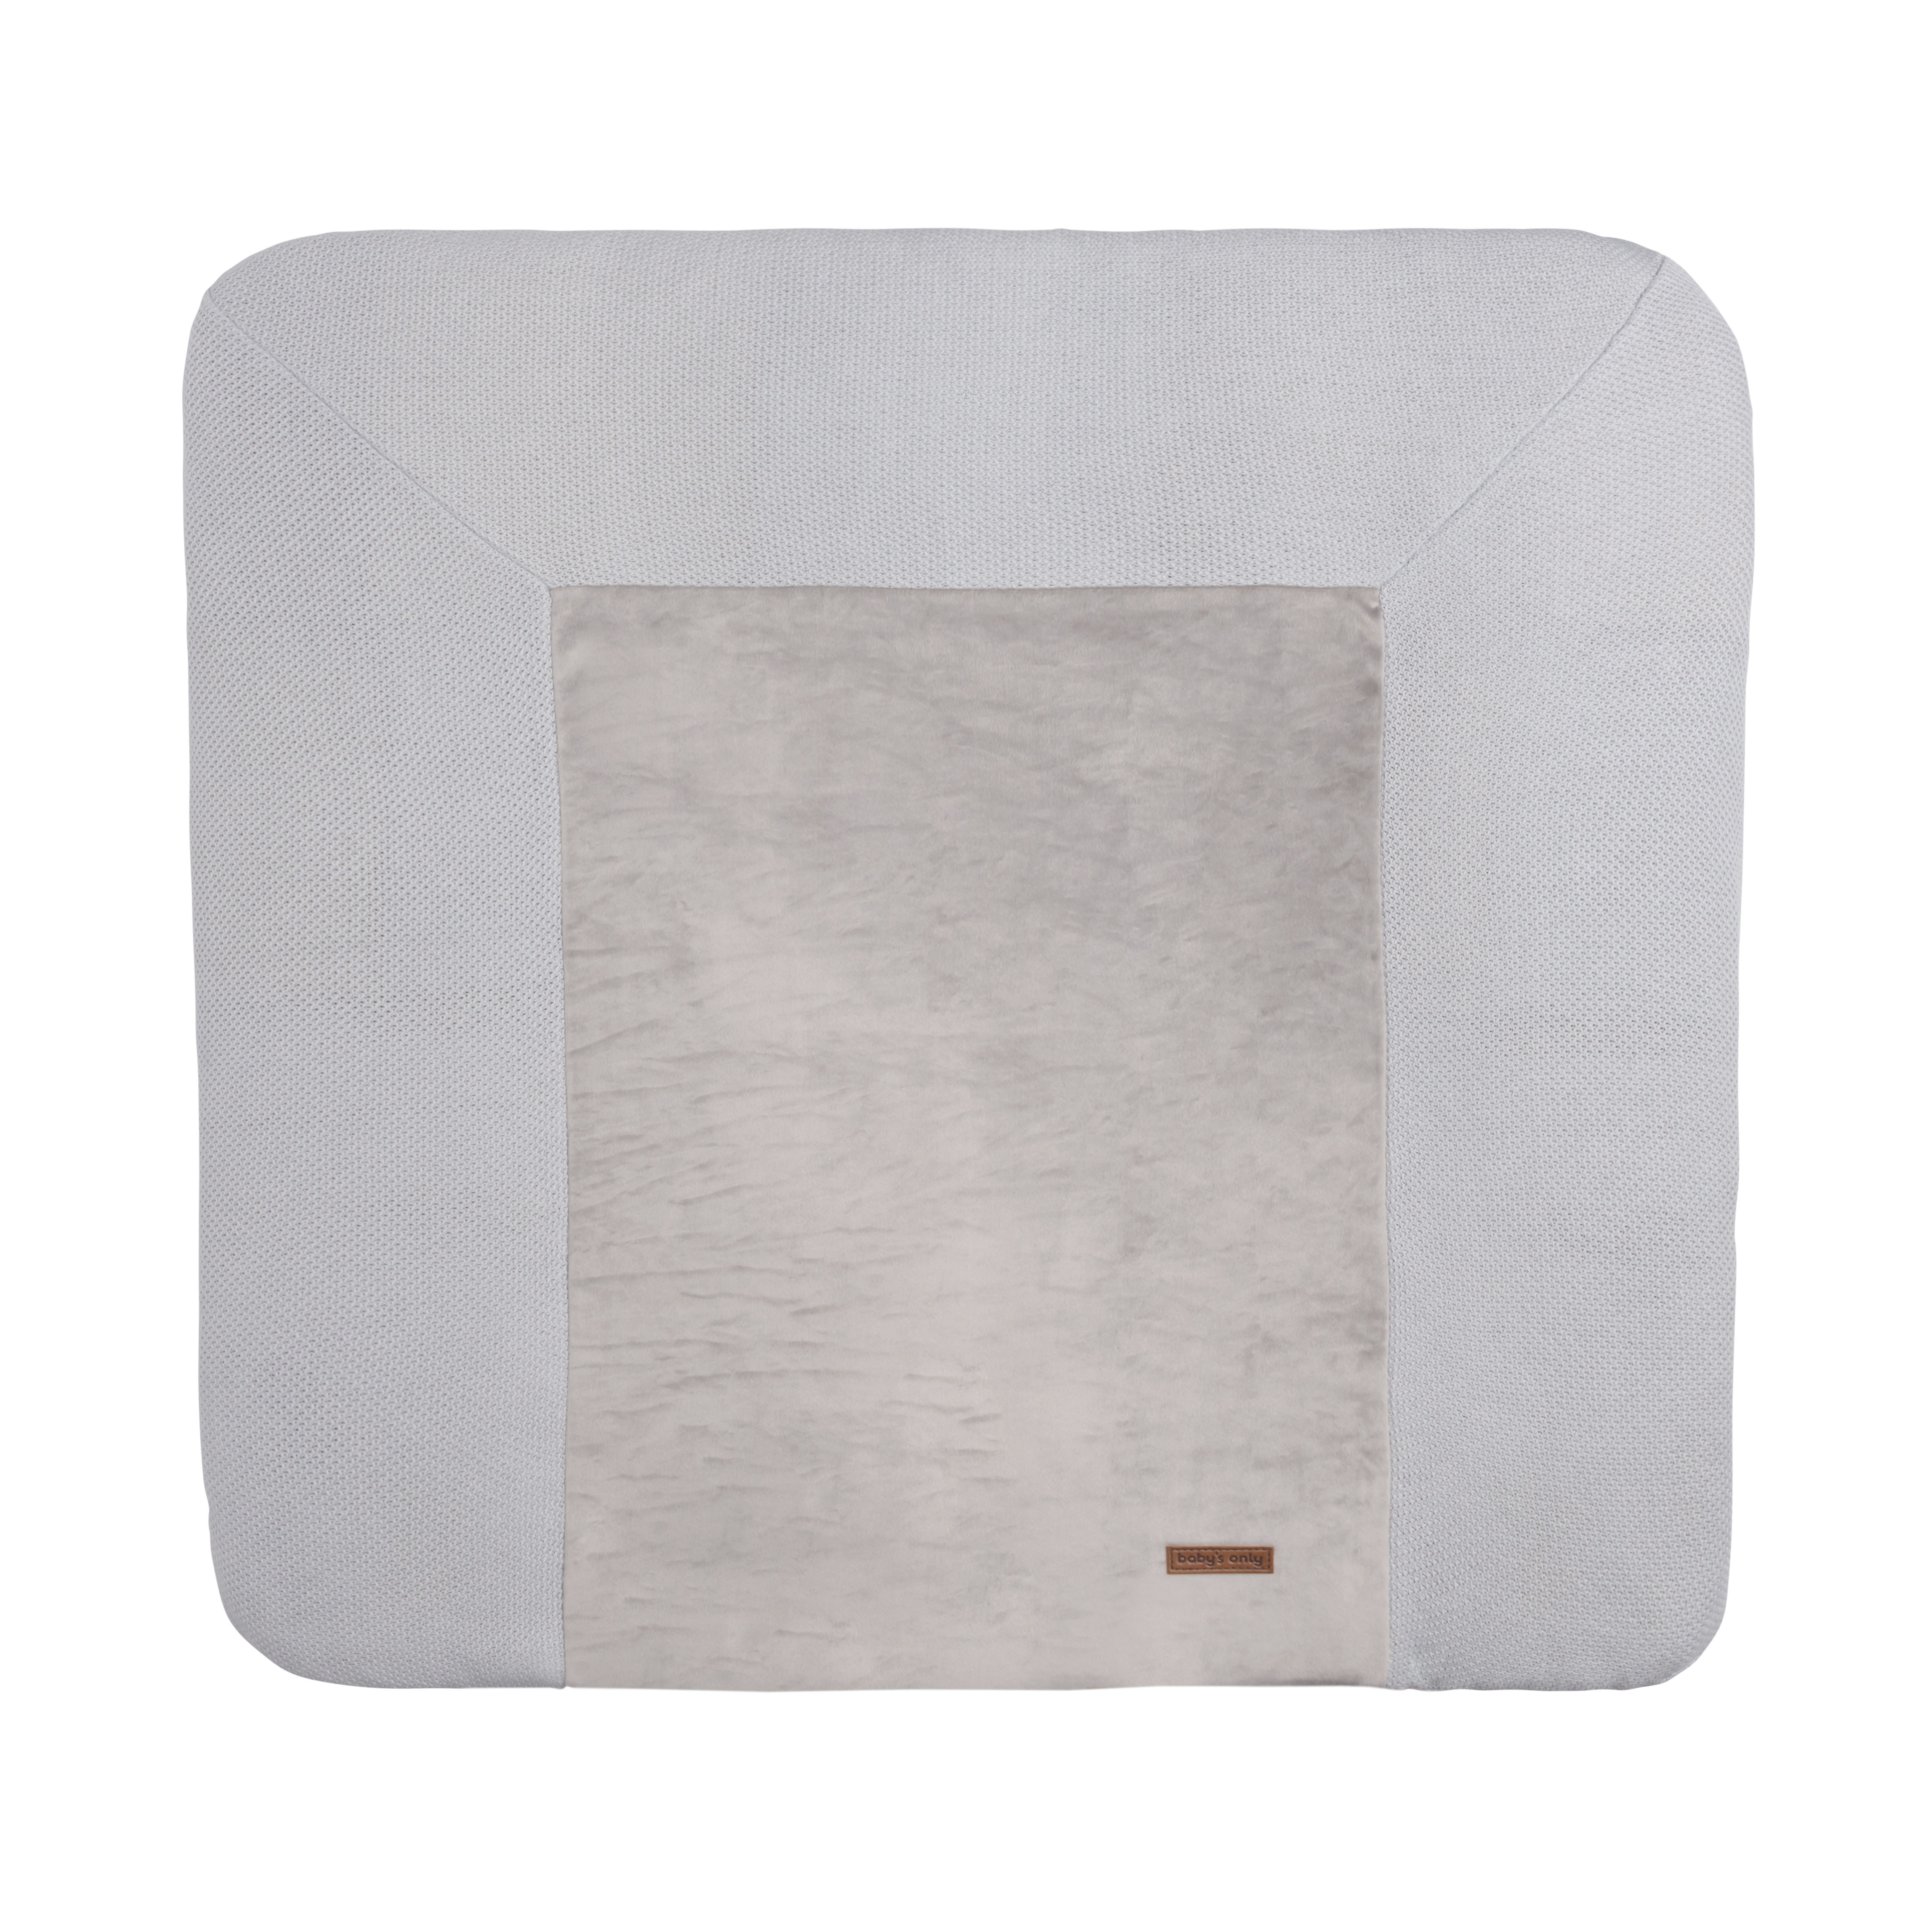 Changing pad cover Classic silver-grey - 75x85